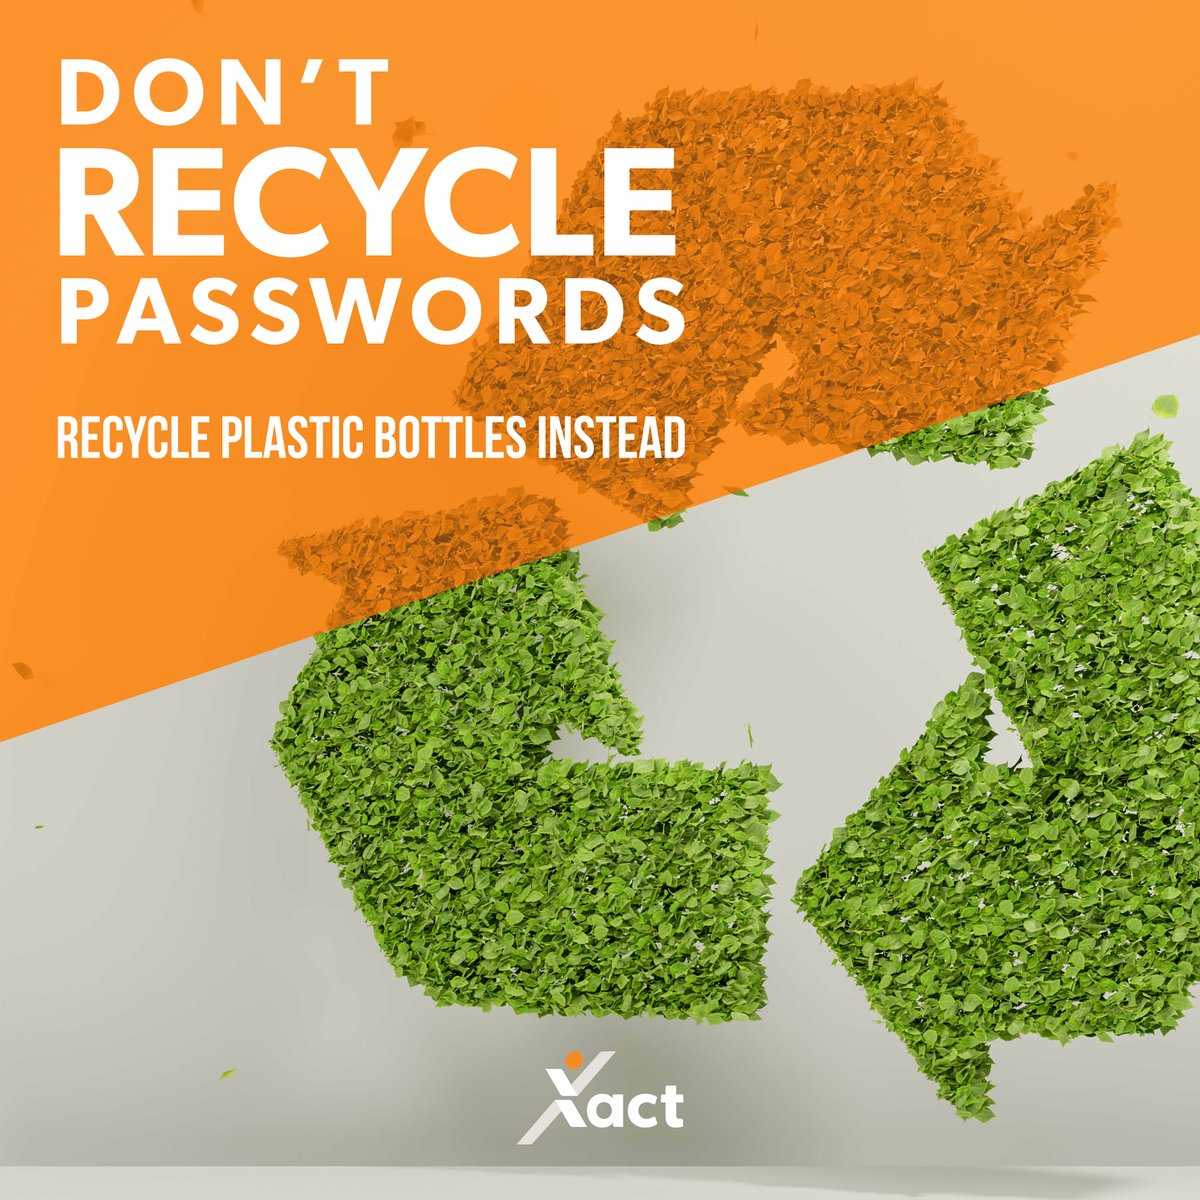 Recycling and reusing are effective ways to reduce waste and be environmentally conscious. However, when it comes to password security, it’s vital never to reuse passwords. #UniquePassword #NeverRecycle